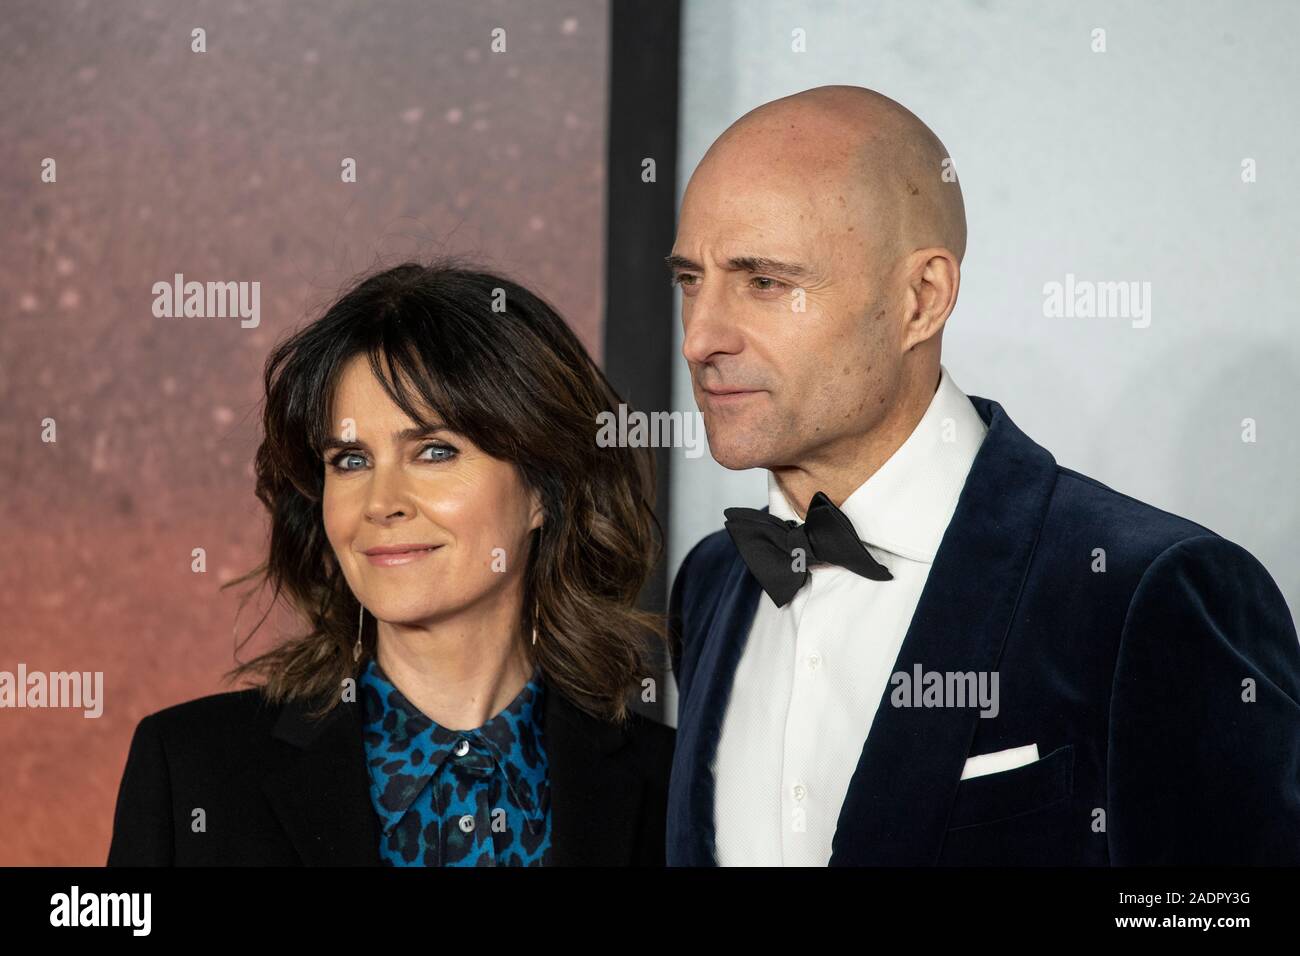 London, UK. 04th Dec, 2019. LONDON, ENGLAND - DECEMBER 04: Liza Marshall and Mark Strong attends the World Premiere and Royal Performance of '1917' at Odeon Luxe Leicester Square on December 4, 2019 in London, England. Credit: Gary Mitchell, GMP Media/Alamy Live News Stock Photo